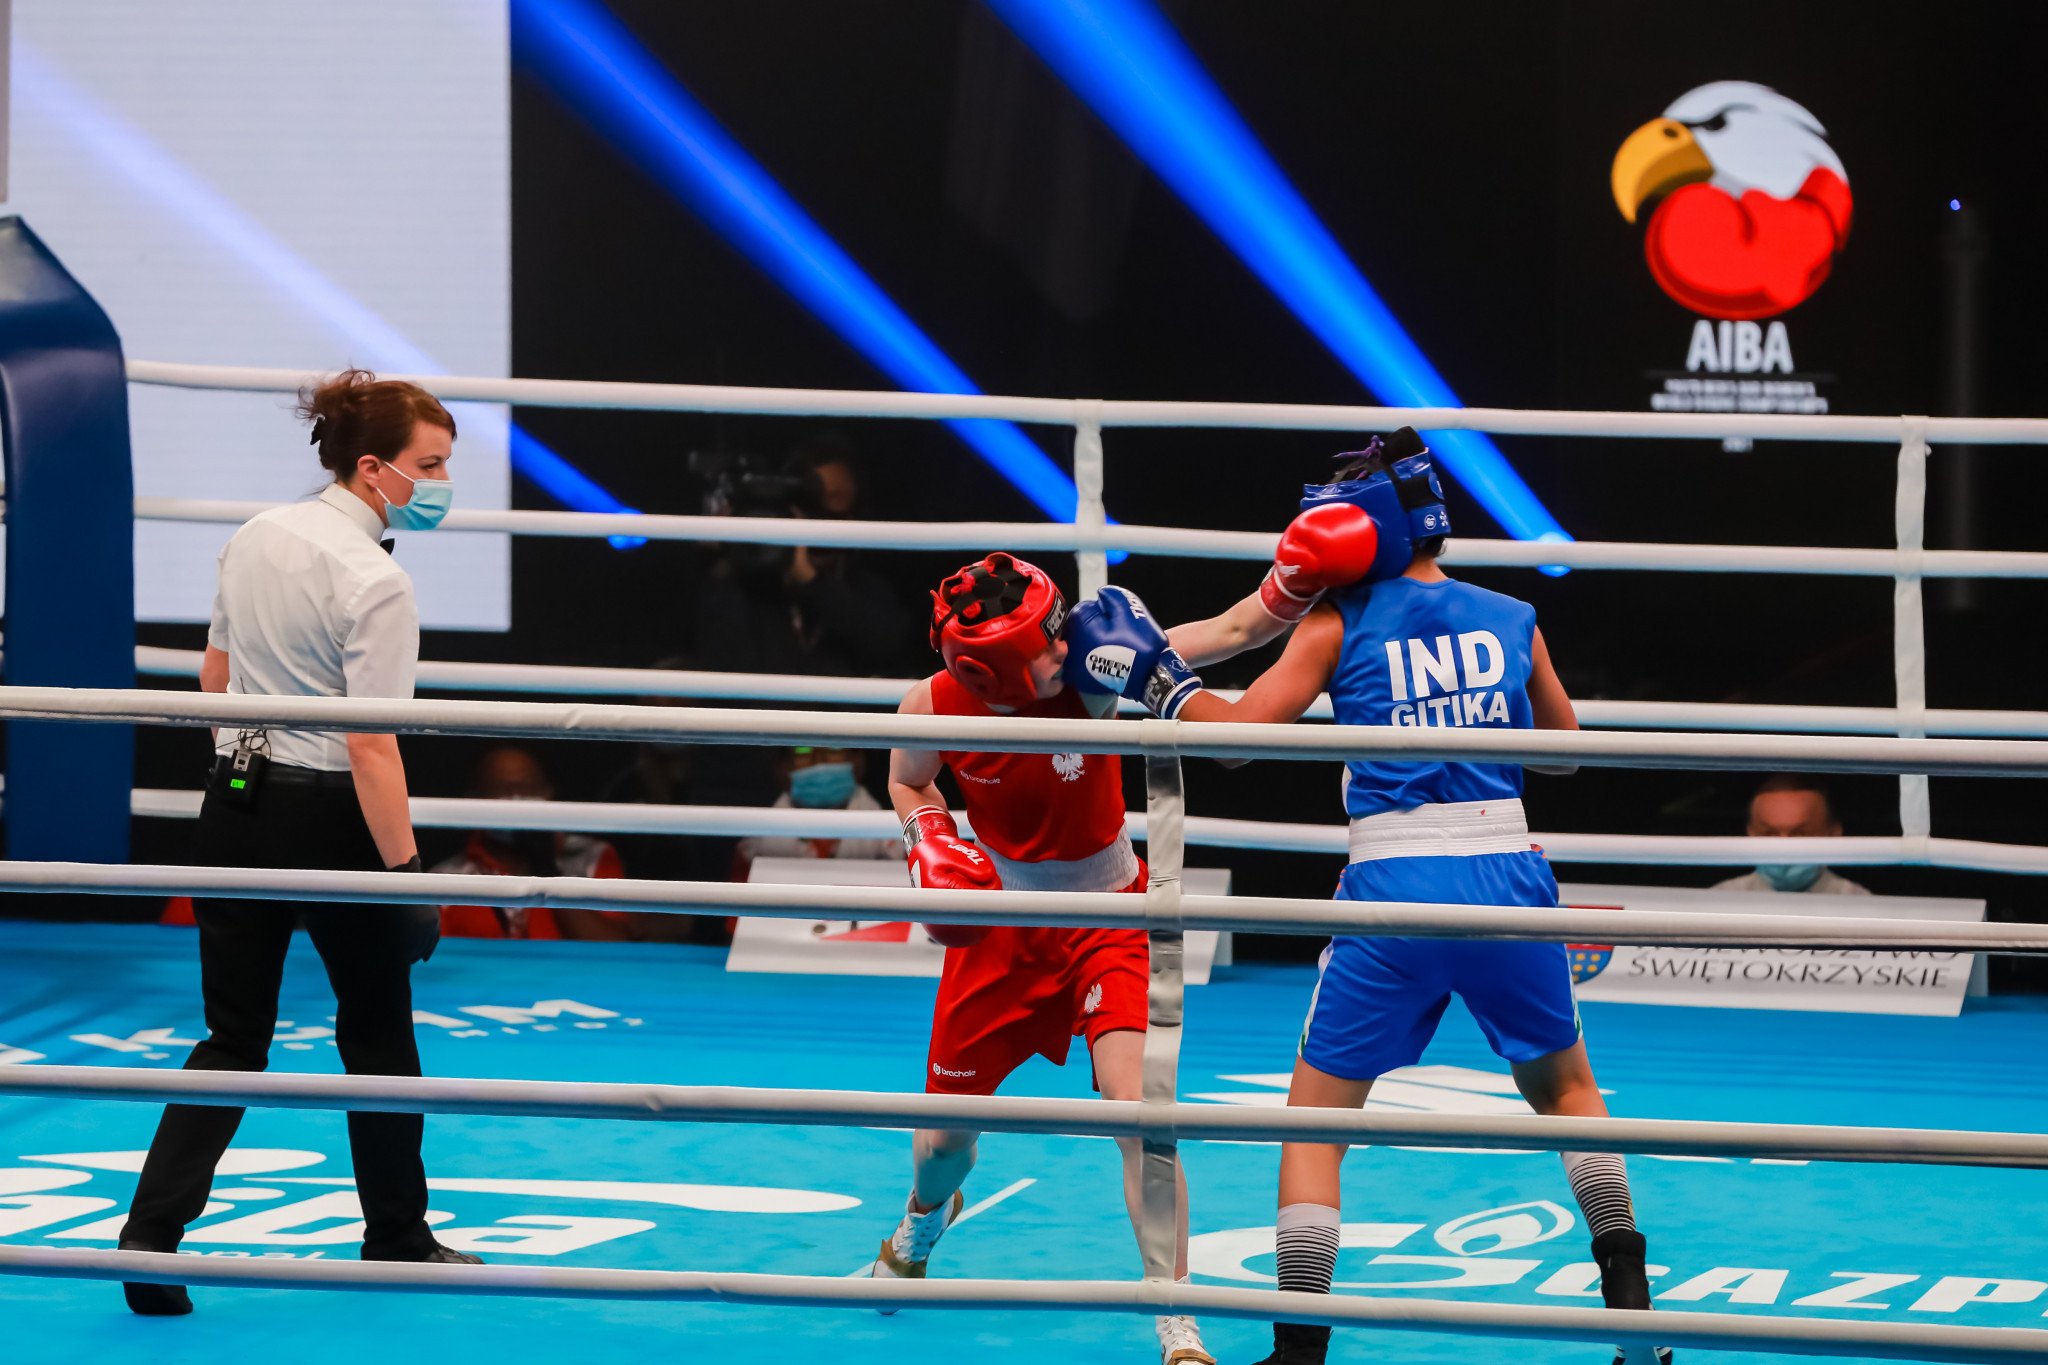 Gitika, in blue, was the first of India's winners of the day in the light flyweight category ©AIBA